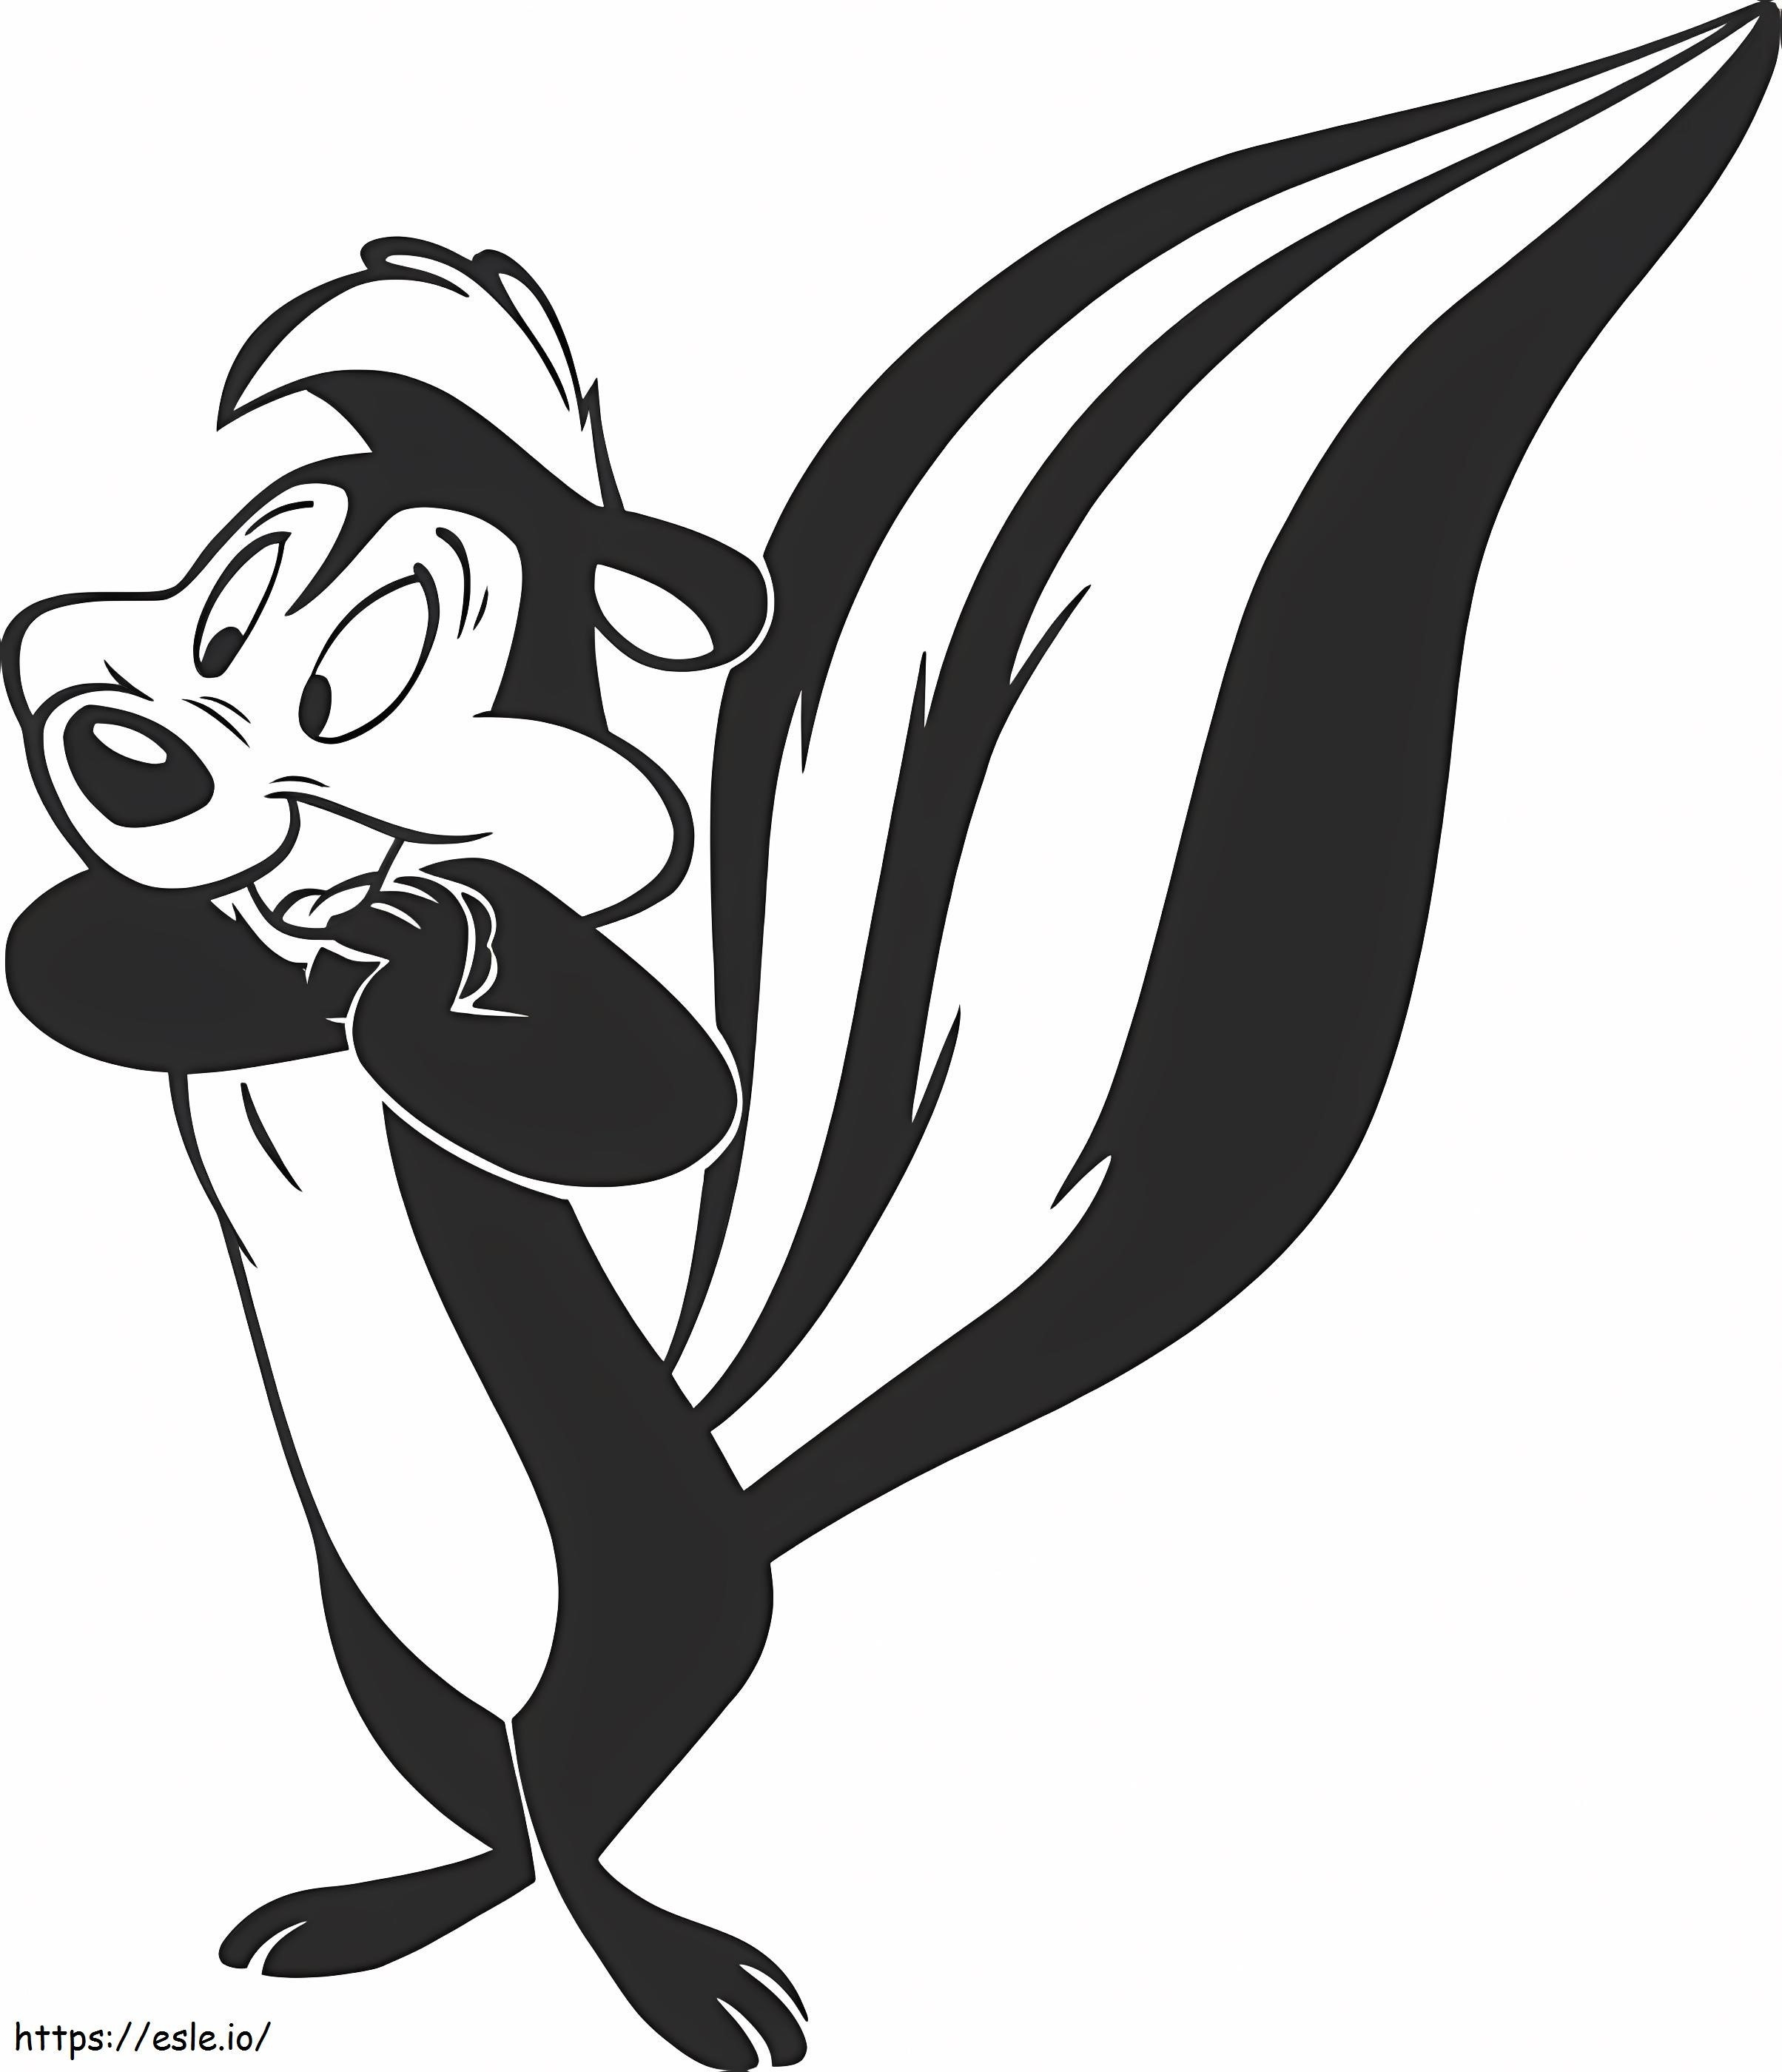 Happy Pepe Le Pew coloring page